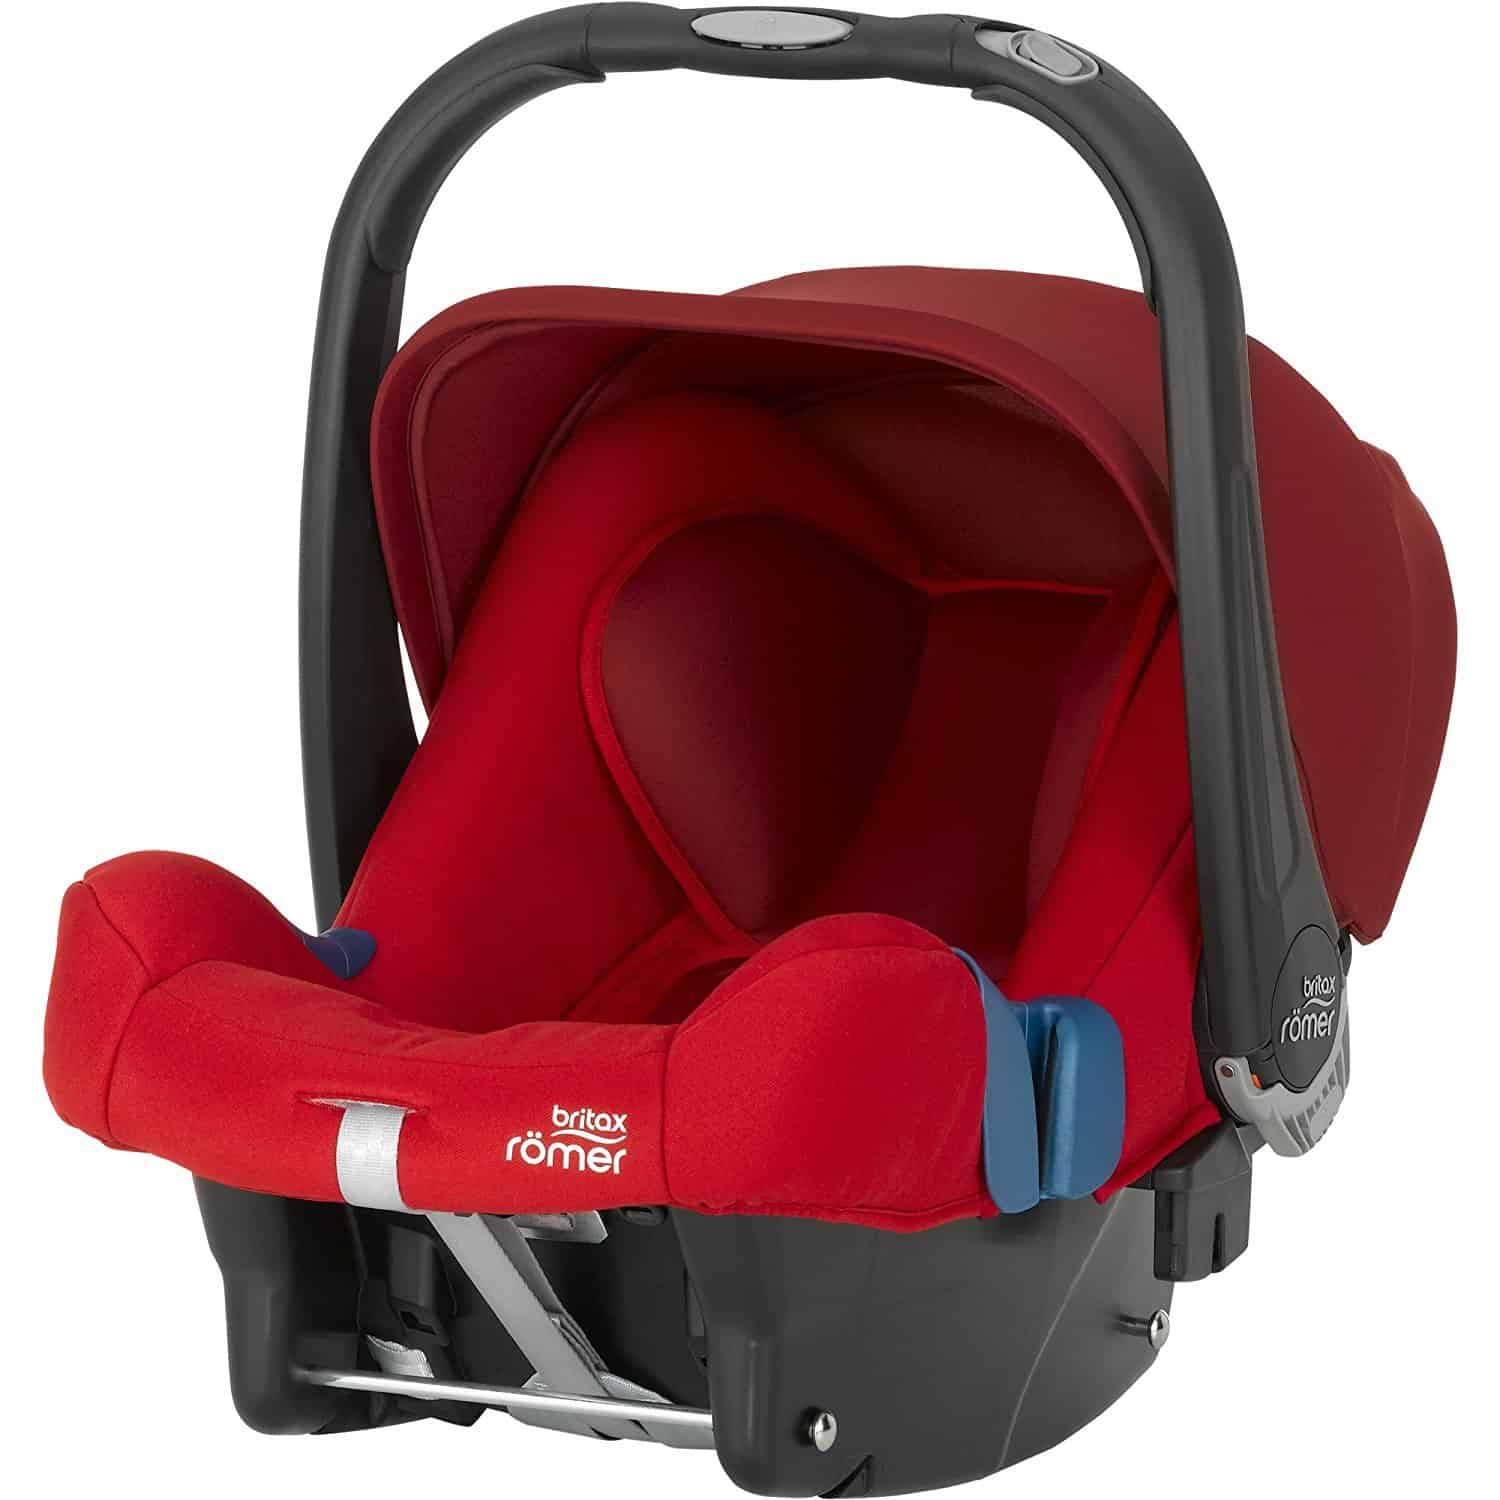 Recommended Seats: EU - Car Seats For The Littles